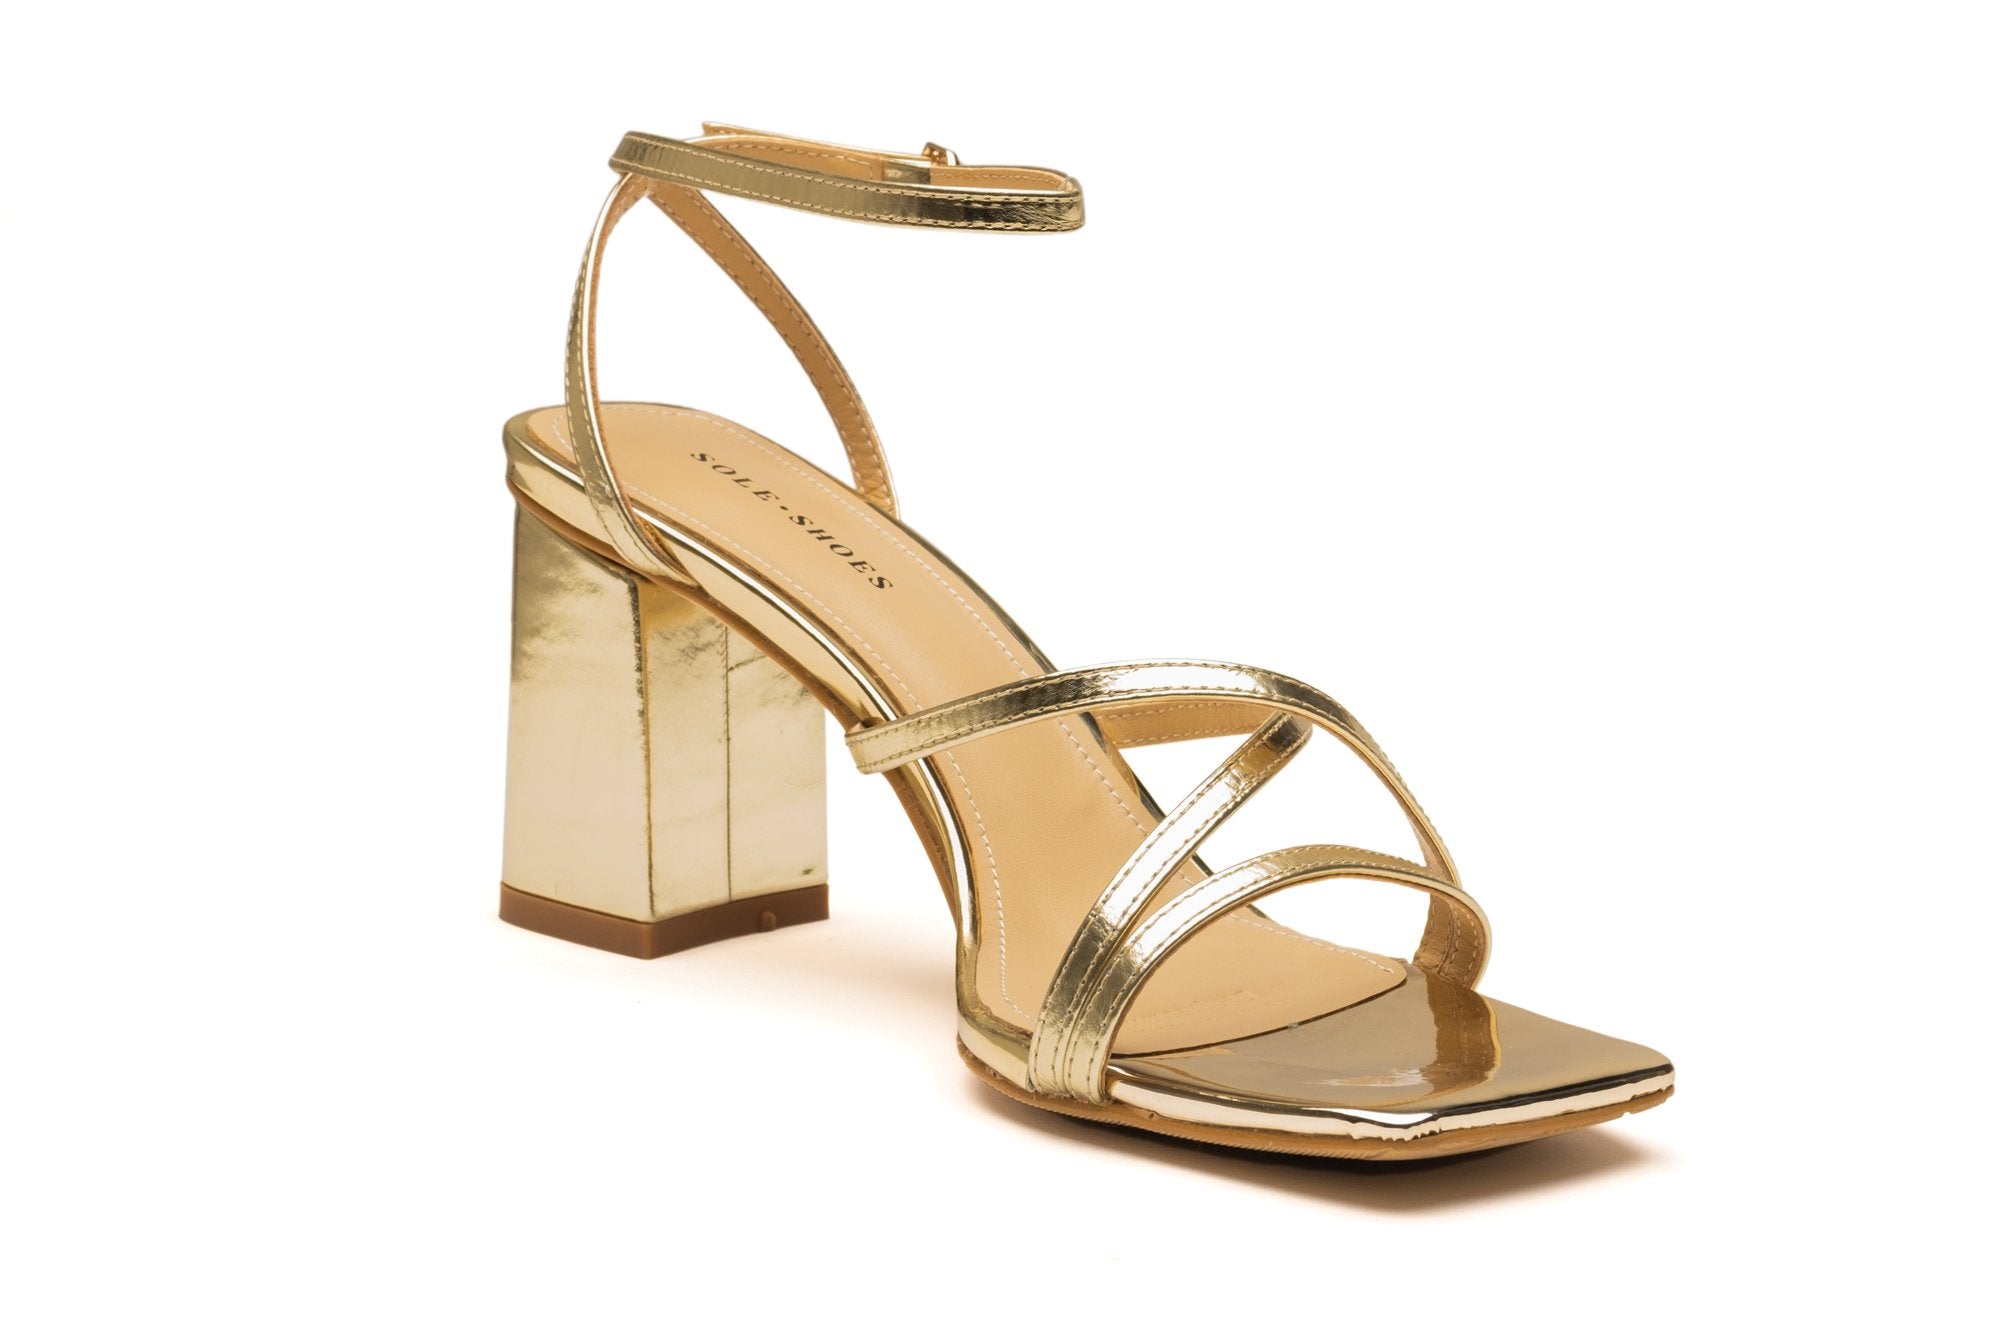 Ky Sandal Heel Gold Heels by Sole Shoes NZ H22-36